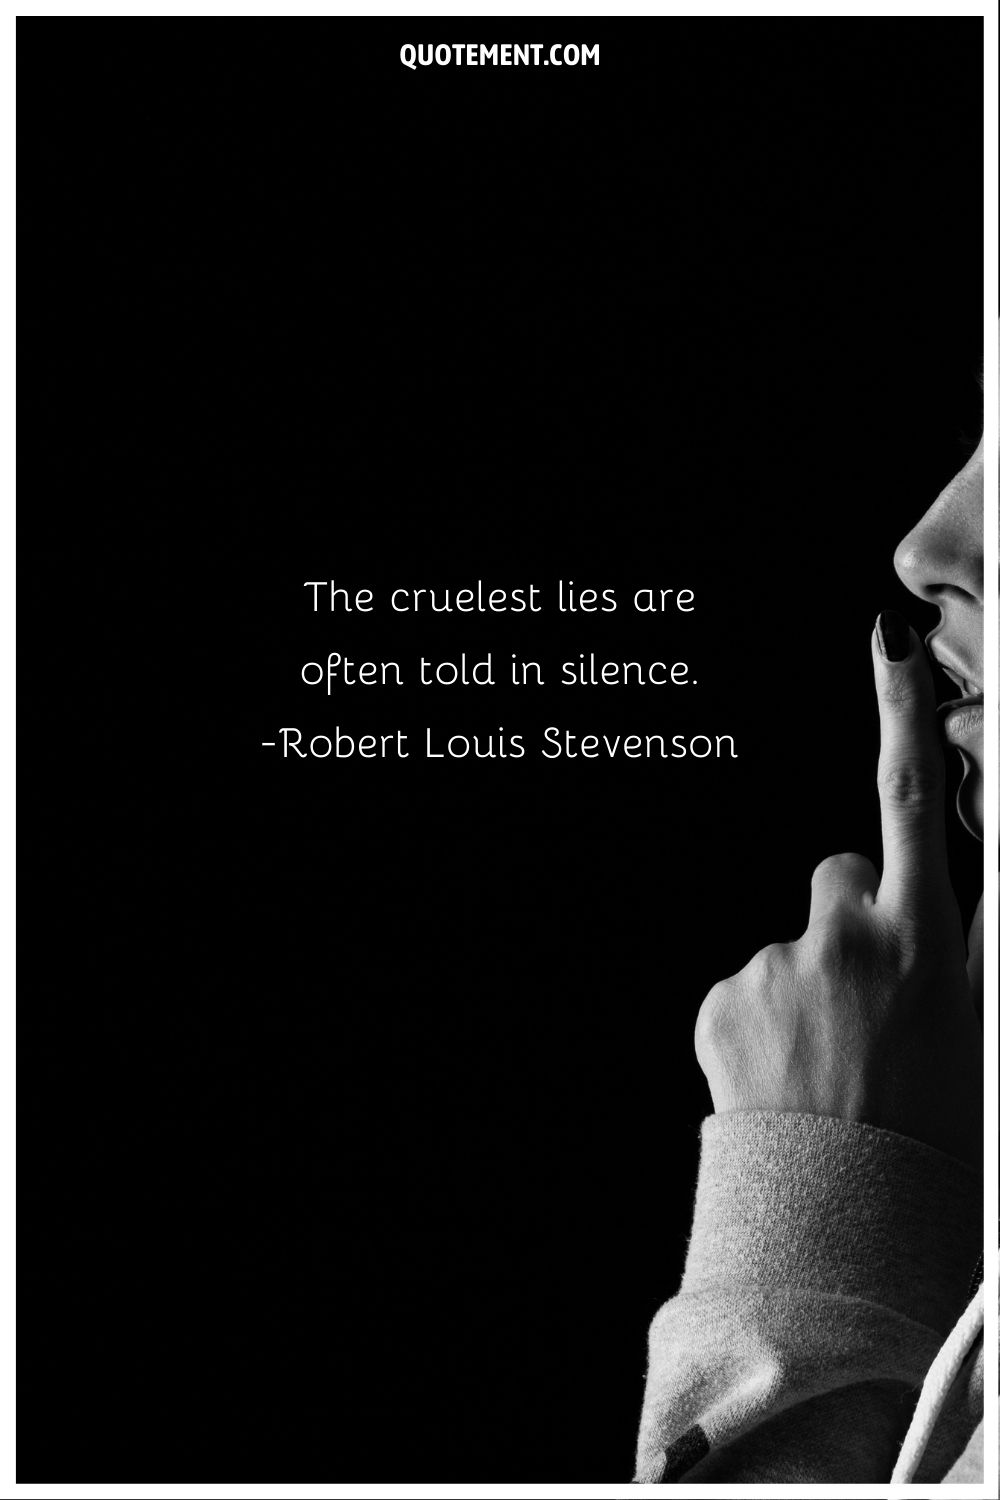 “The cruelest lies are often told in silence.” ― Robert Louis Stevenson, Virginibus Puerisque and Other Papers